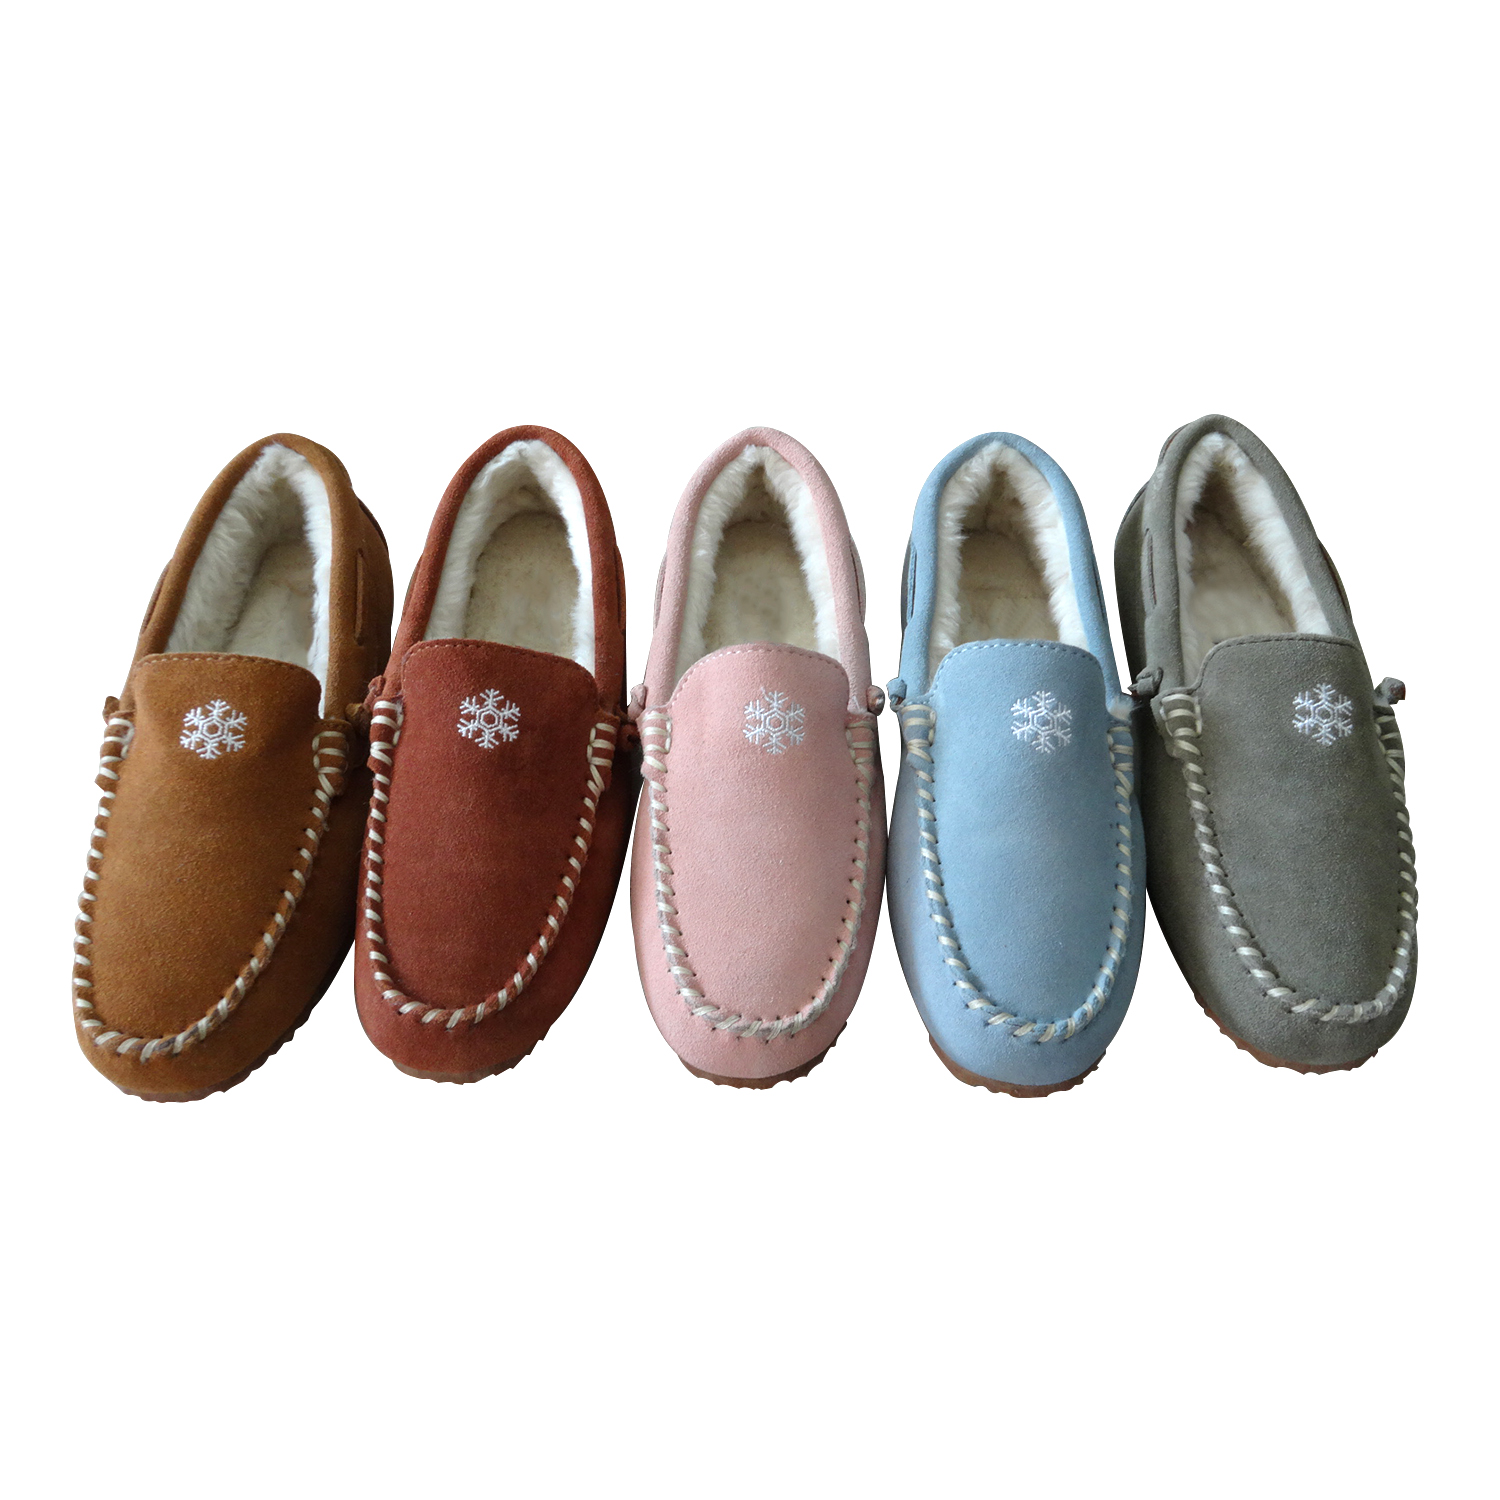 Women’s Warm Snow Embroidery Leather Moccasin Slippers 